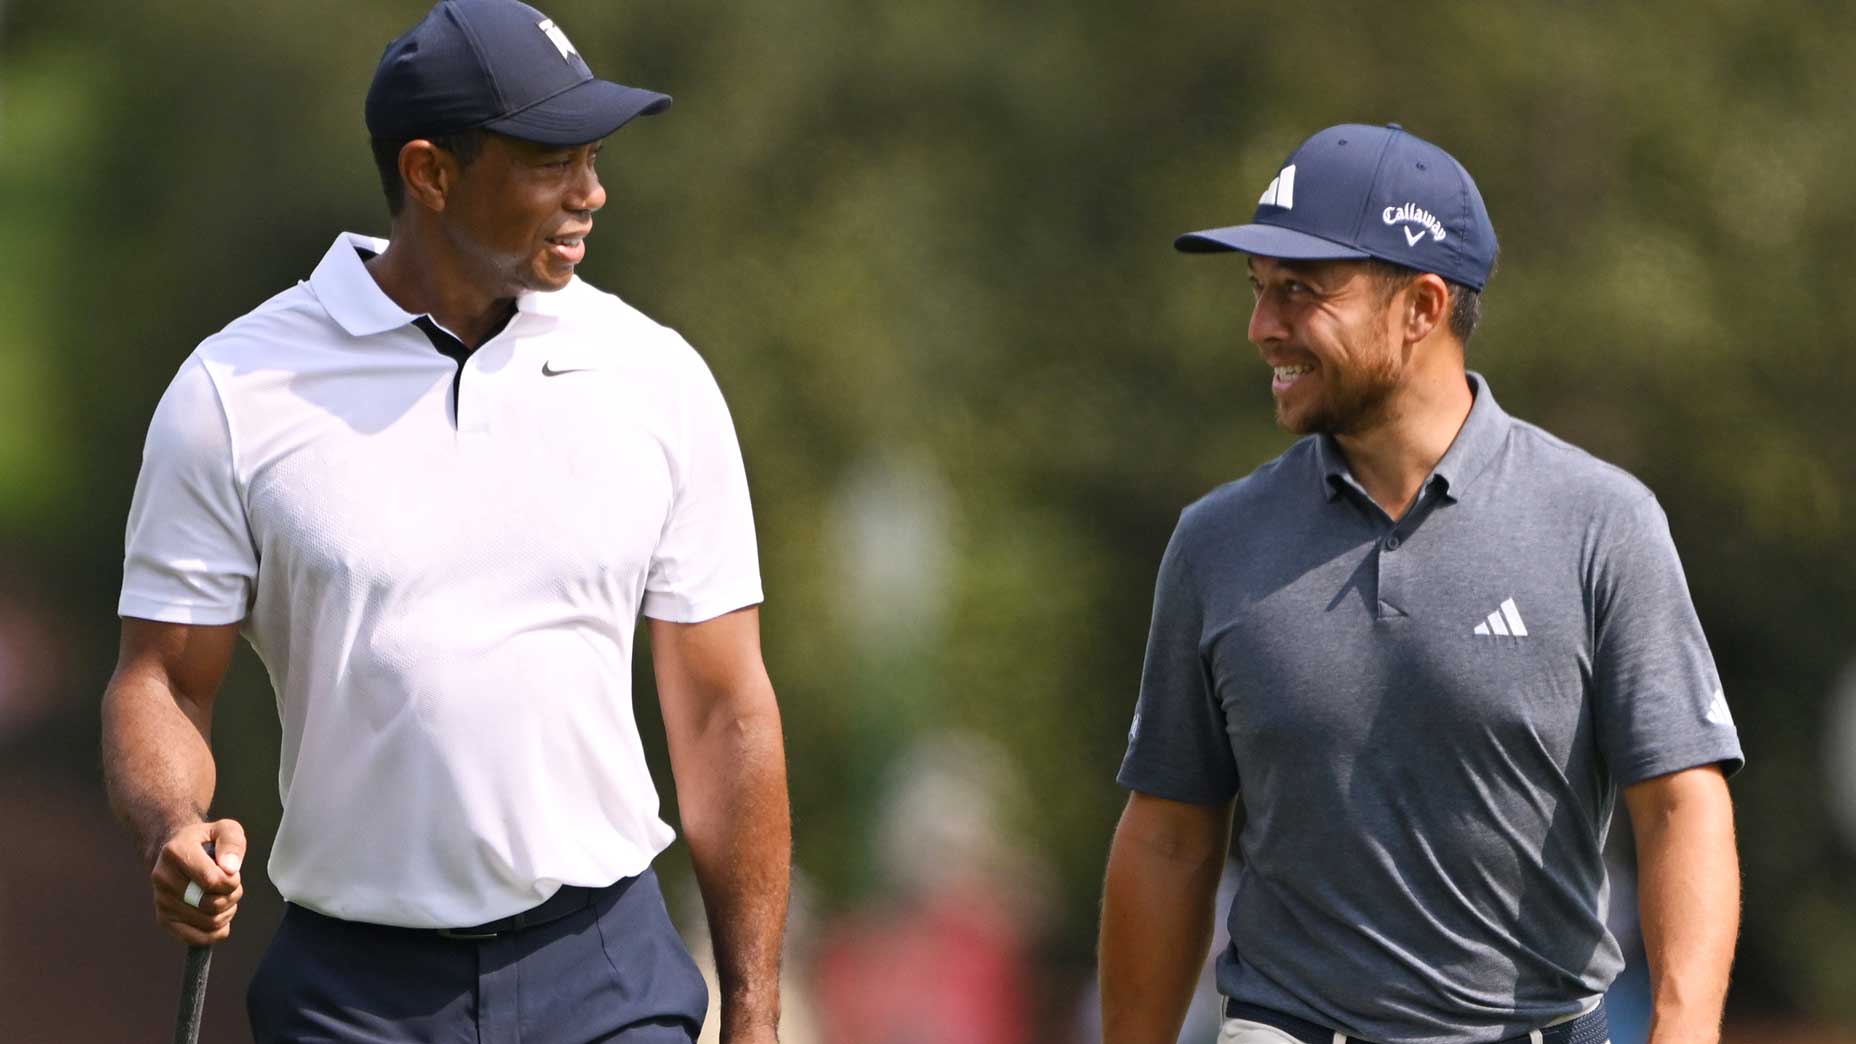 Tiger Woods and Xander Schauffele at the 2023 Masters.